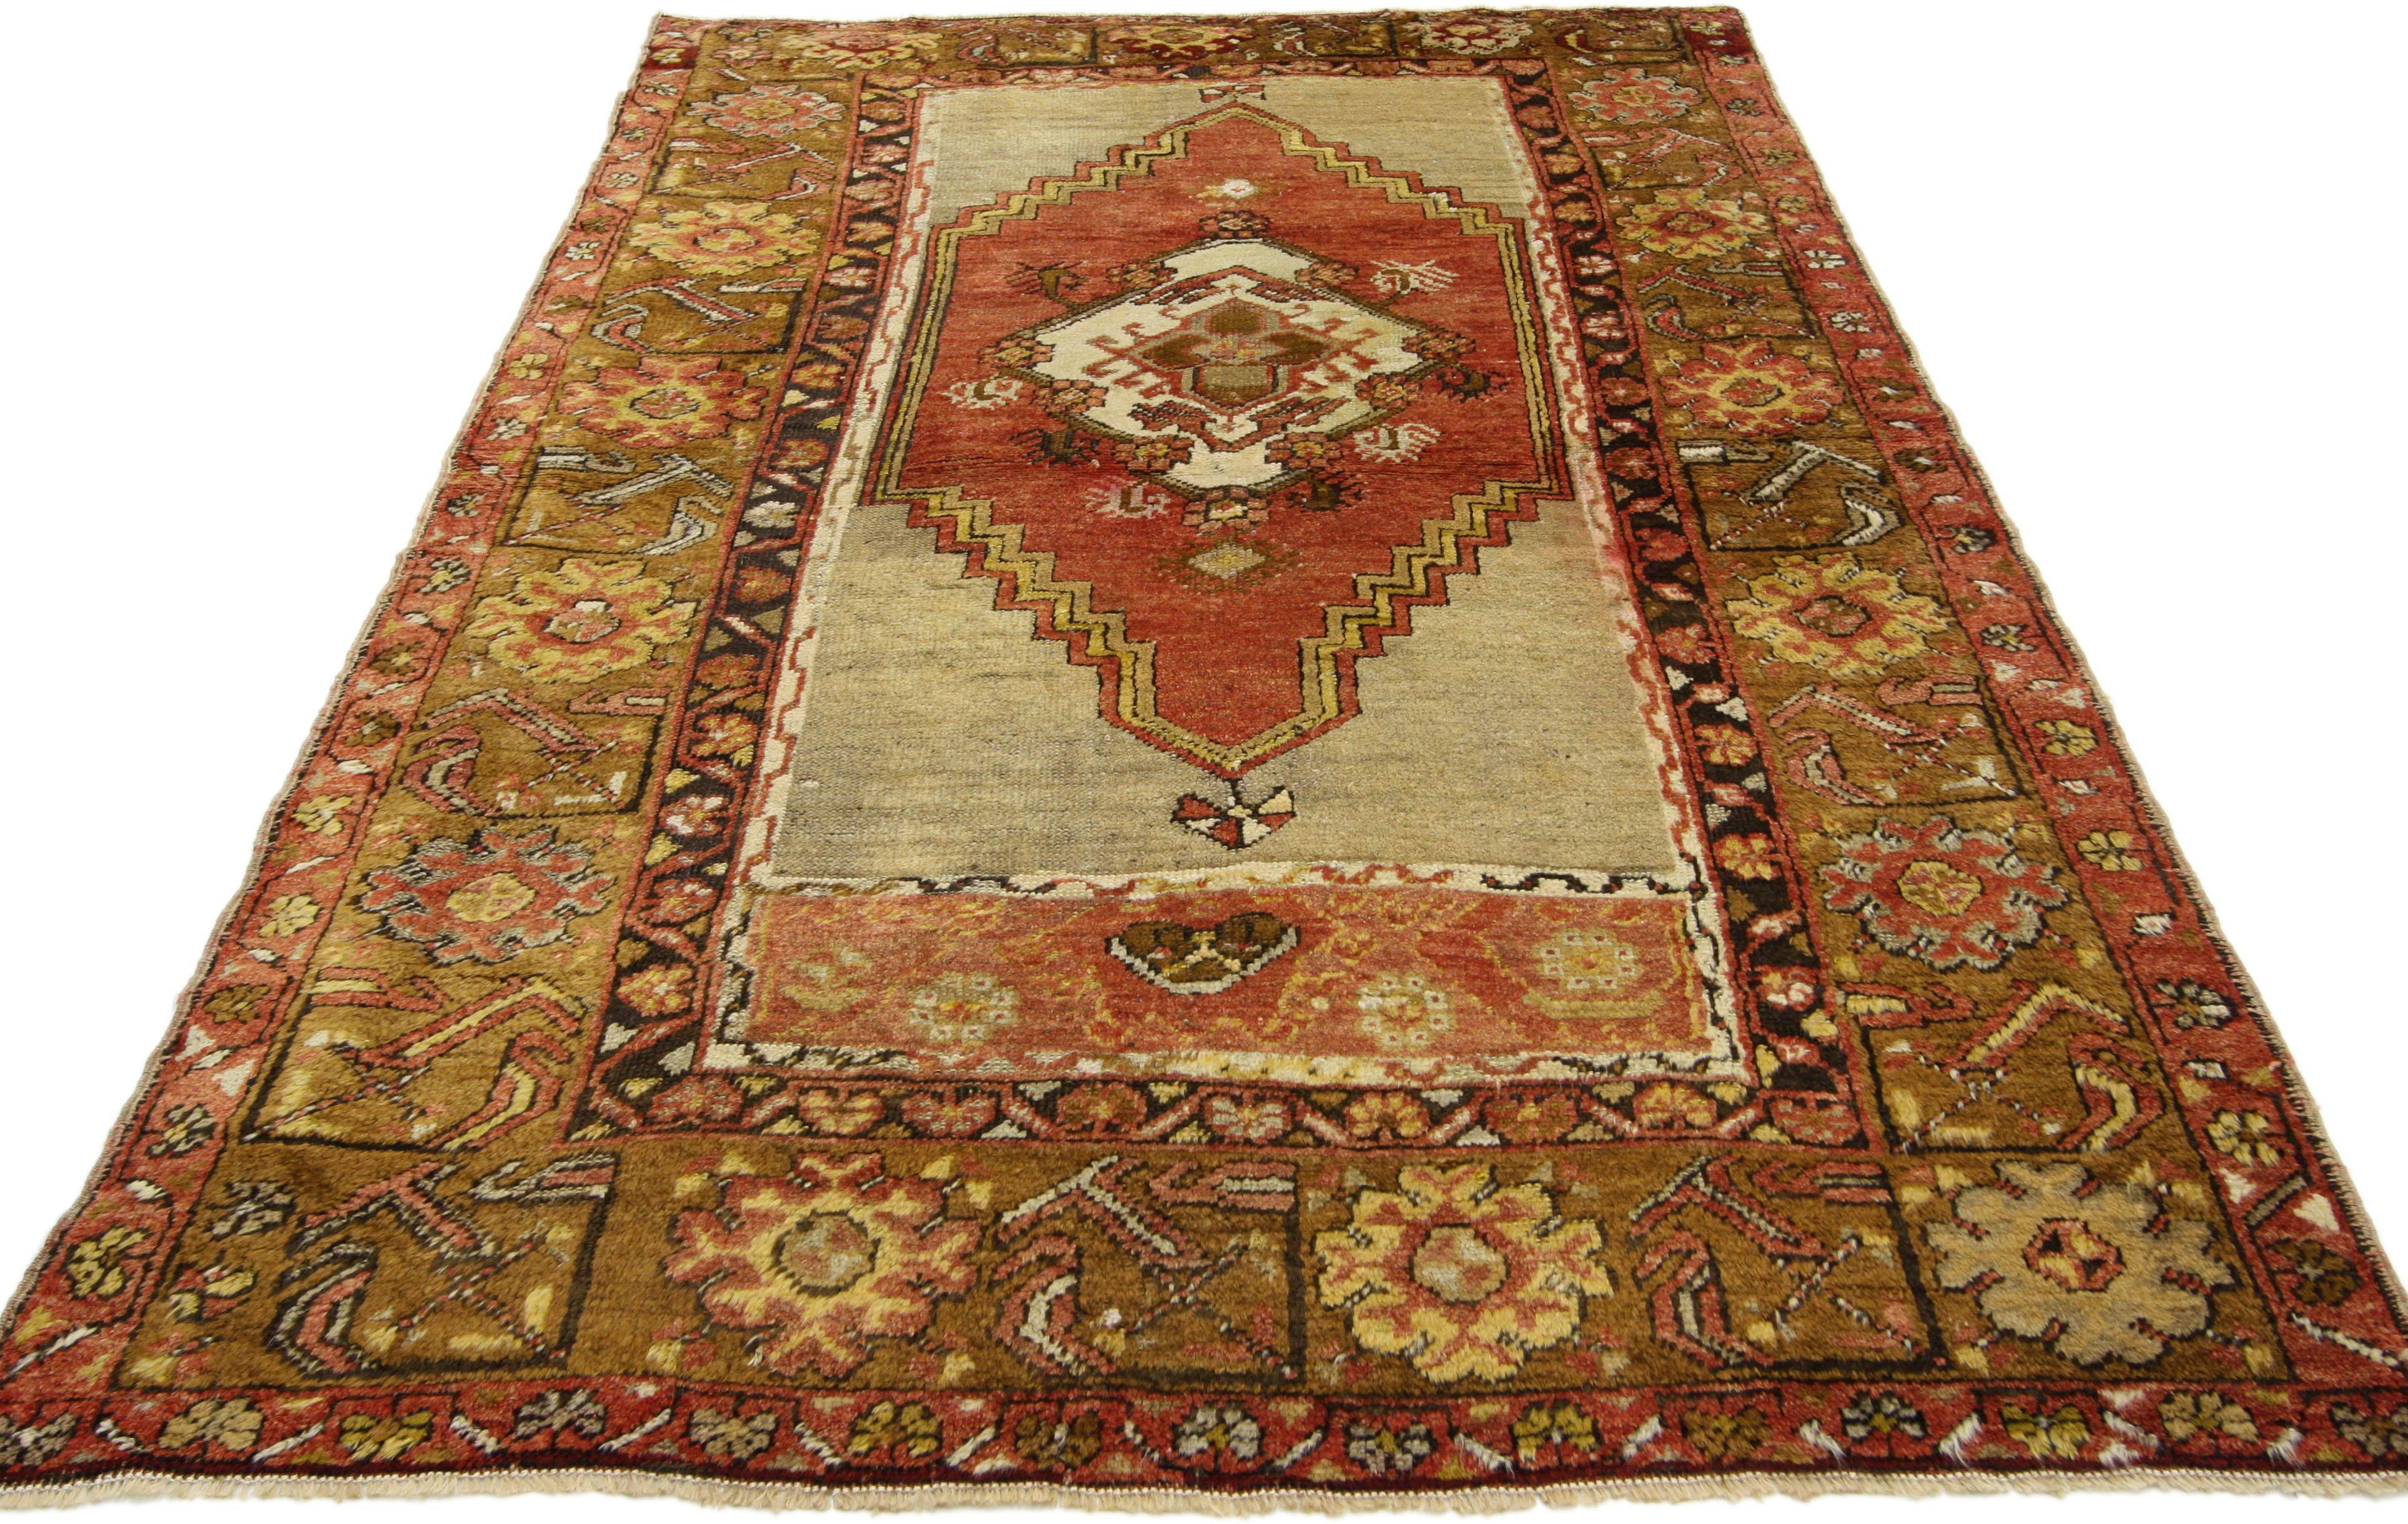 50640, vintage Turkish Oushak Accent rug, entry or foyer rug. This vintage Turkish Oushak rug features a modern traditional style. Immersed in Anatolian history and refined colors, this vintage Oushak rug combines simplicity with sophistication.